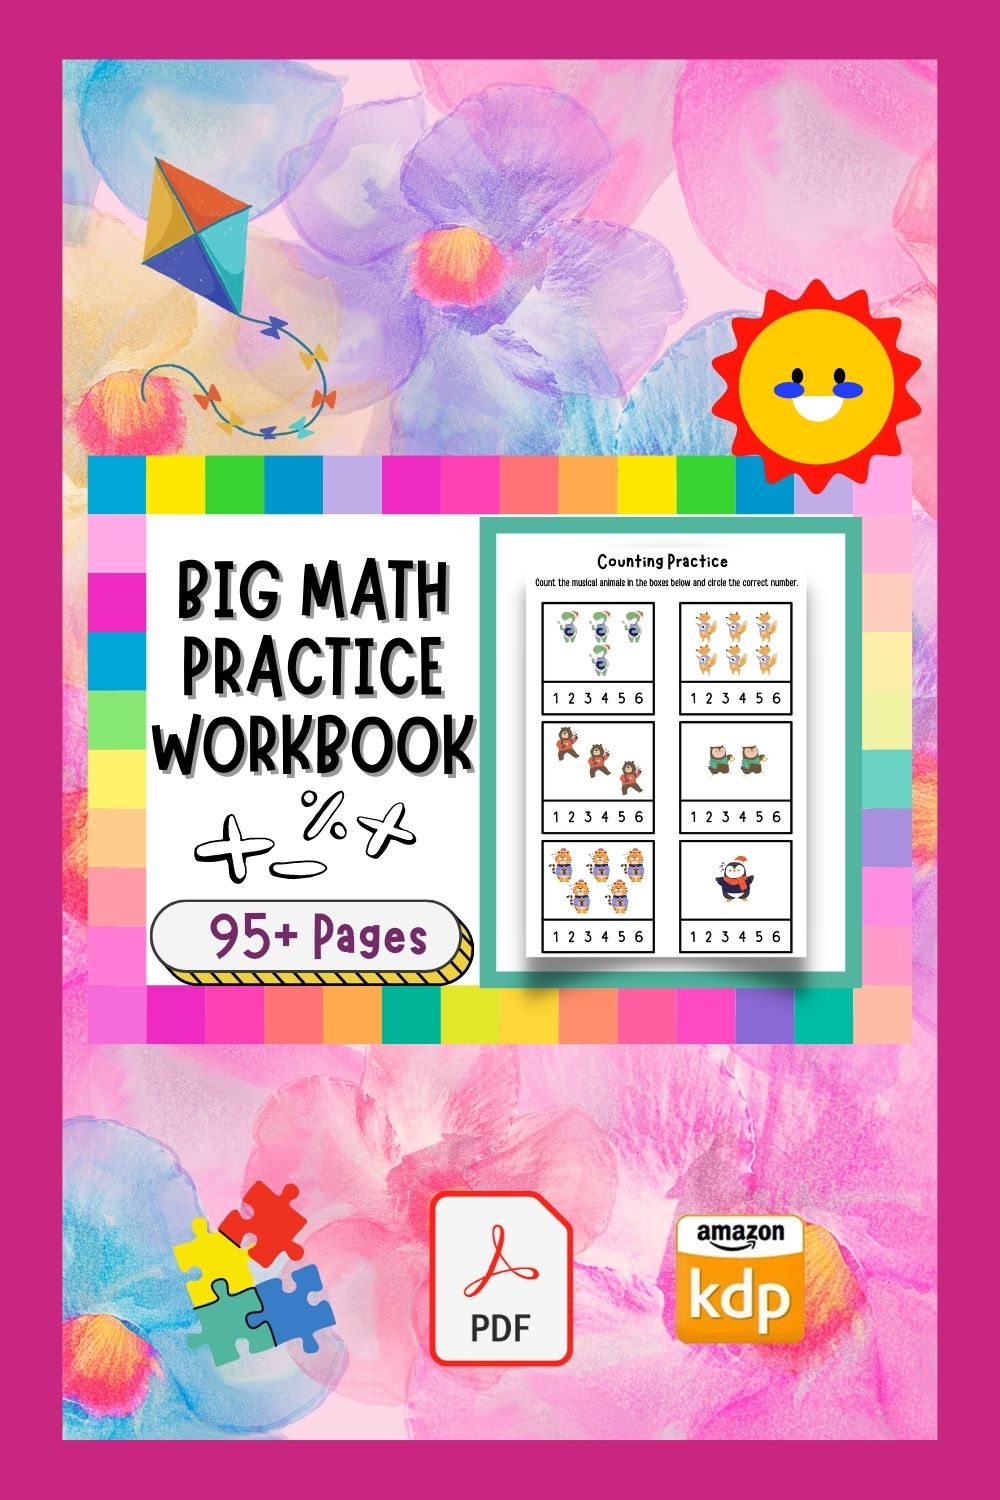 Morning Math Activities For Kids - Worksheets for Practicing Skills & Enrichment pinterest preview image.